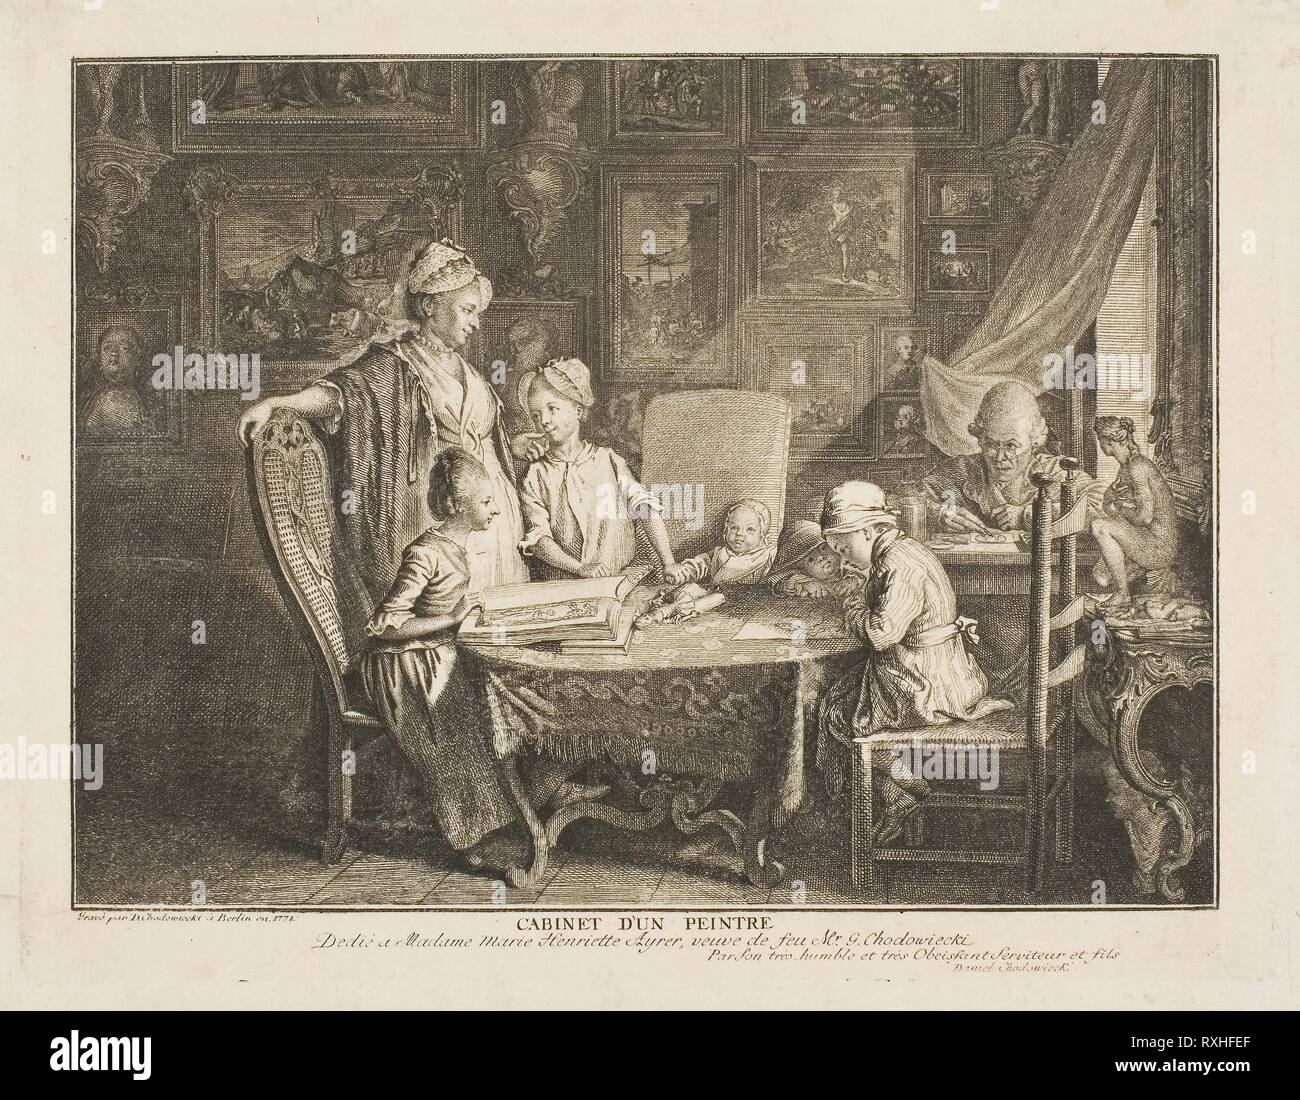 The Artist and his Family. Daniel Nikolaus Chodowiecki; German, 1726-1801. Date: 1771. Dimensions: 190 x 245 mm. Engraving on paper. Origin: Germany. Museum: The Chicago Art Institute. Stock Photo